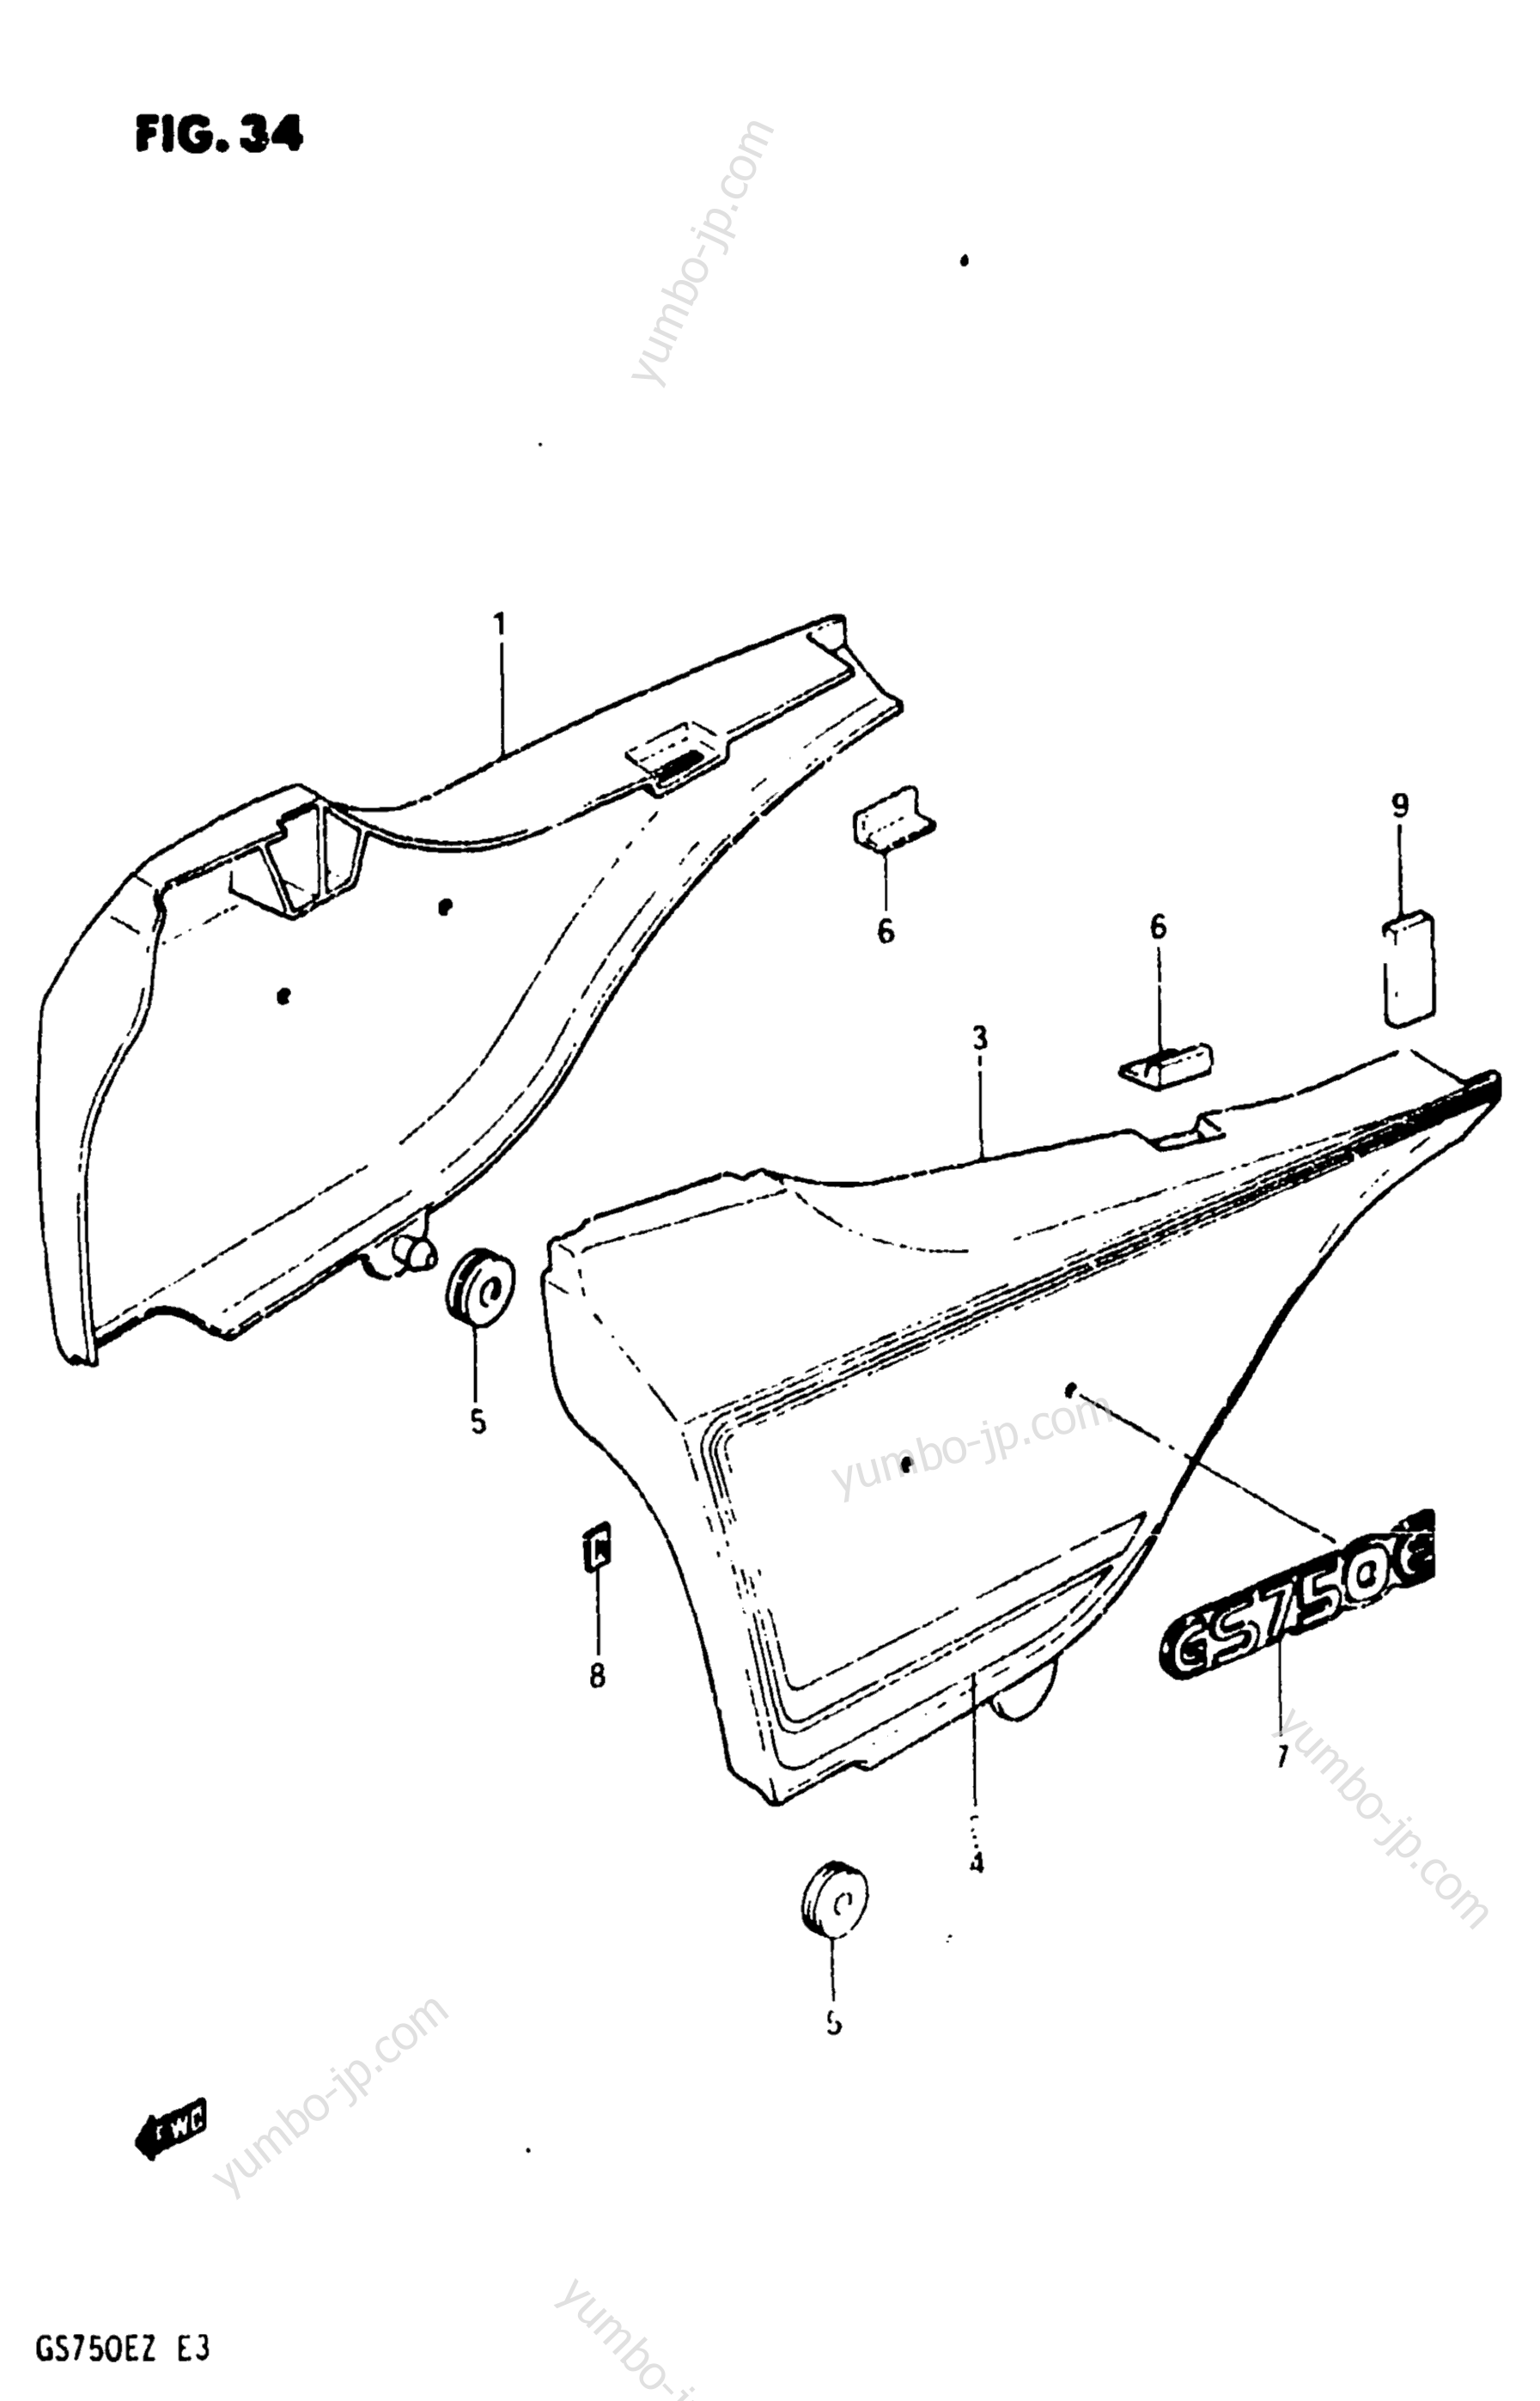 FRAME COVER for motorcycles SUZUKI GS750E 1982 year